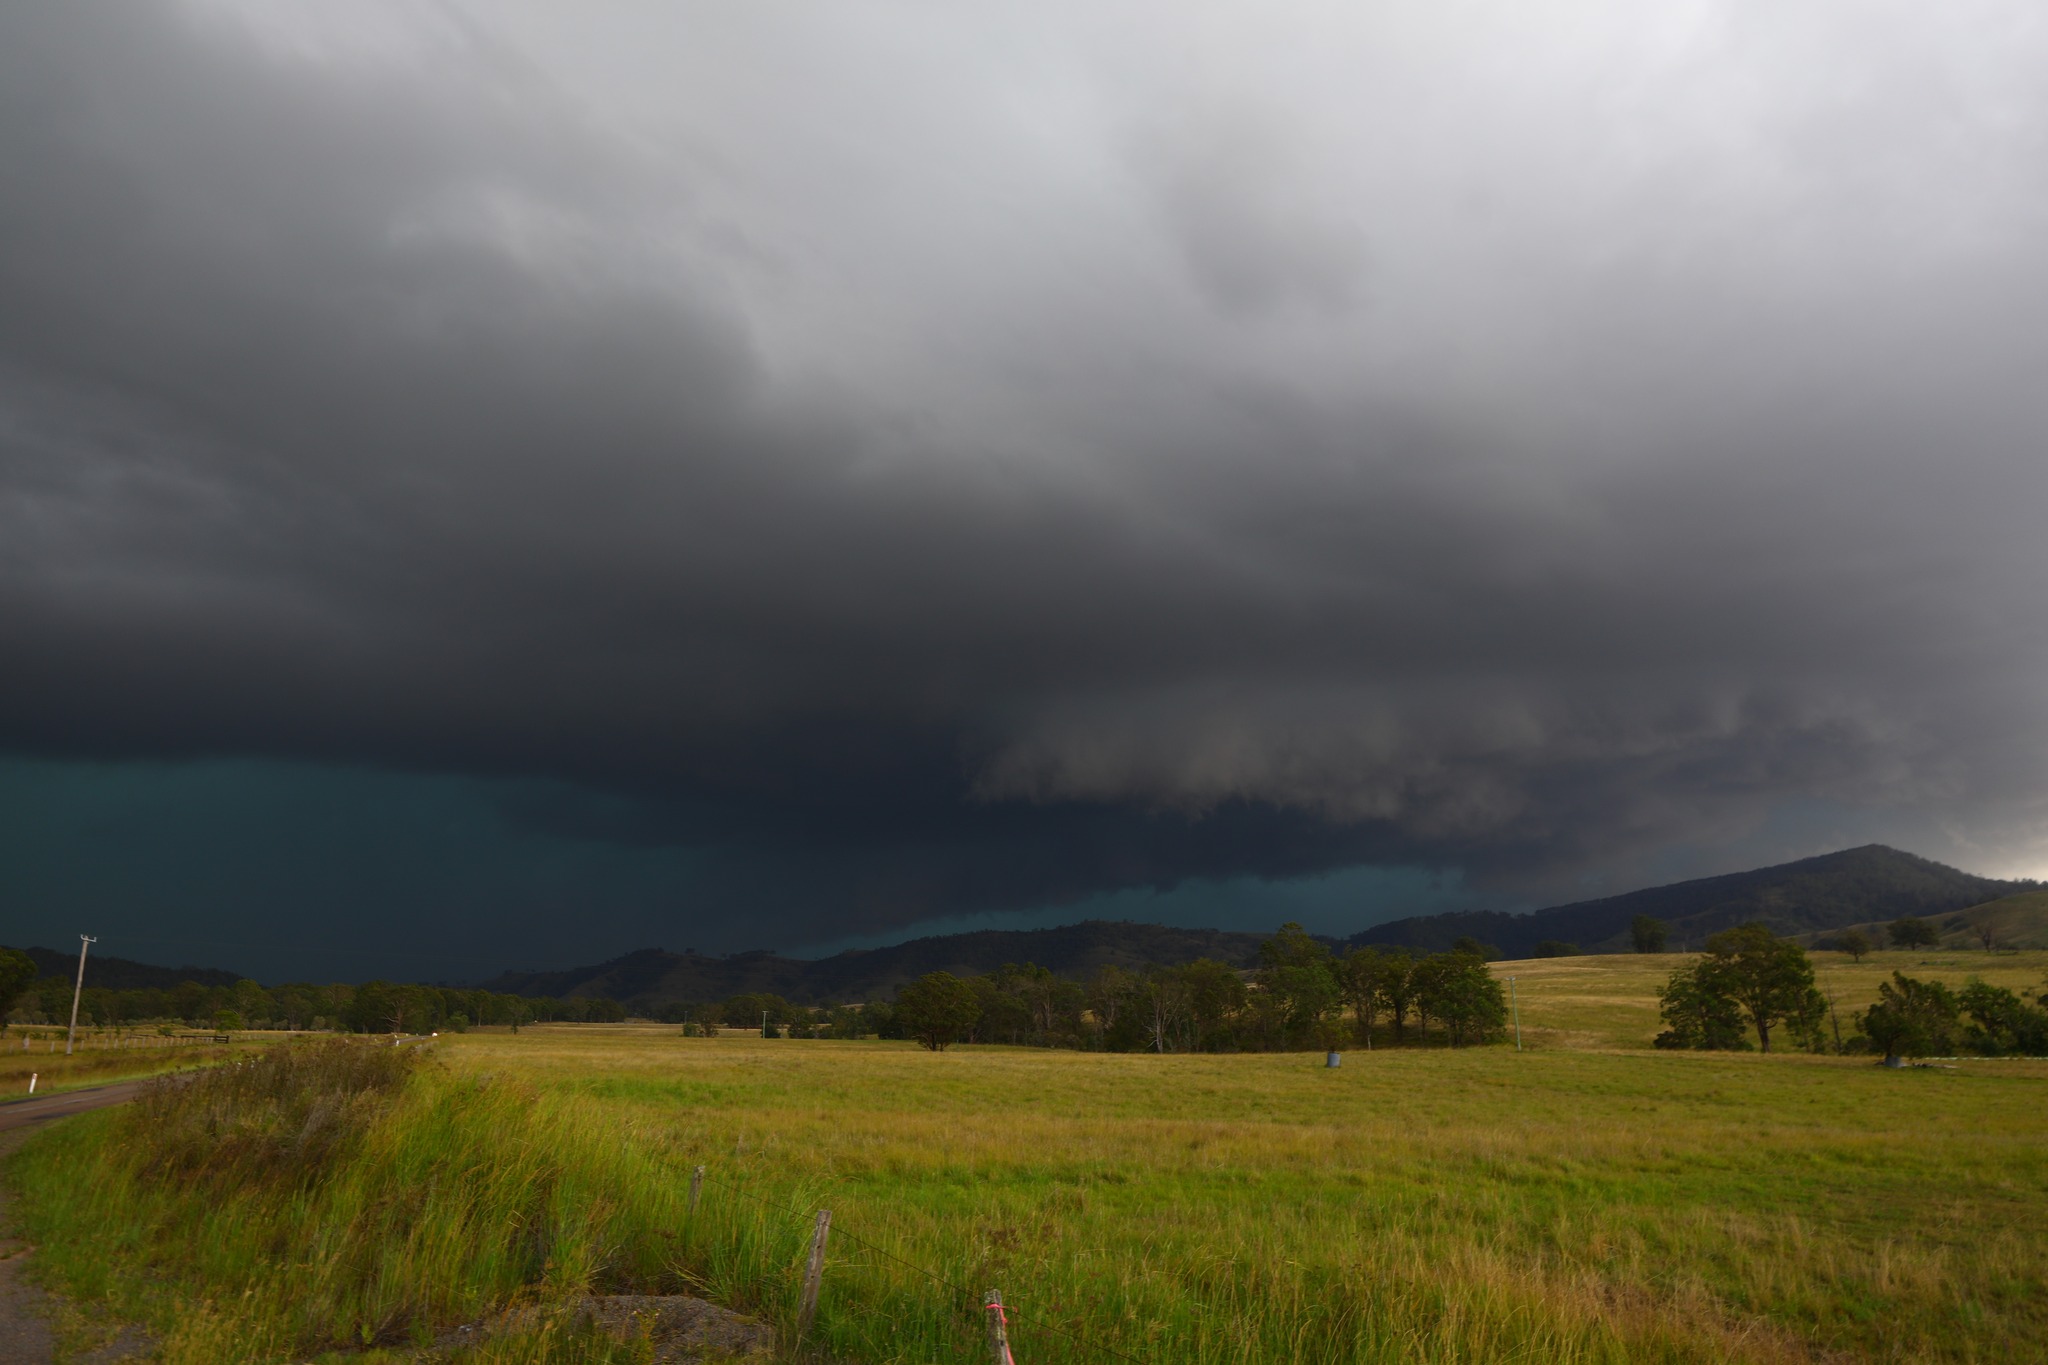 More Storm Action from 27th February 2023. Followed this storm from Putty all the way through to Dungog ater work. It experienced lowering bases and ...